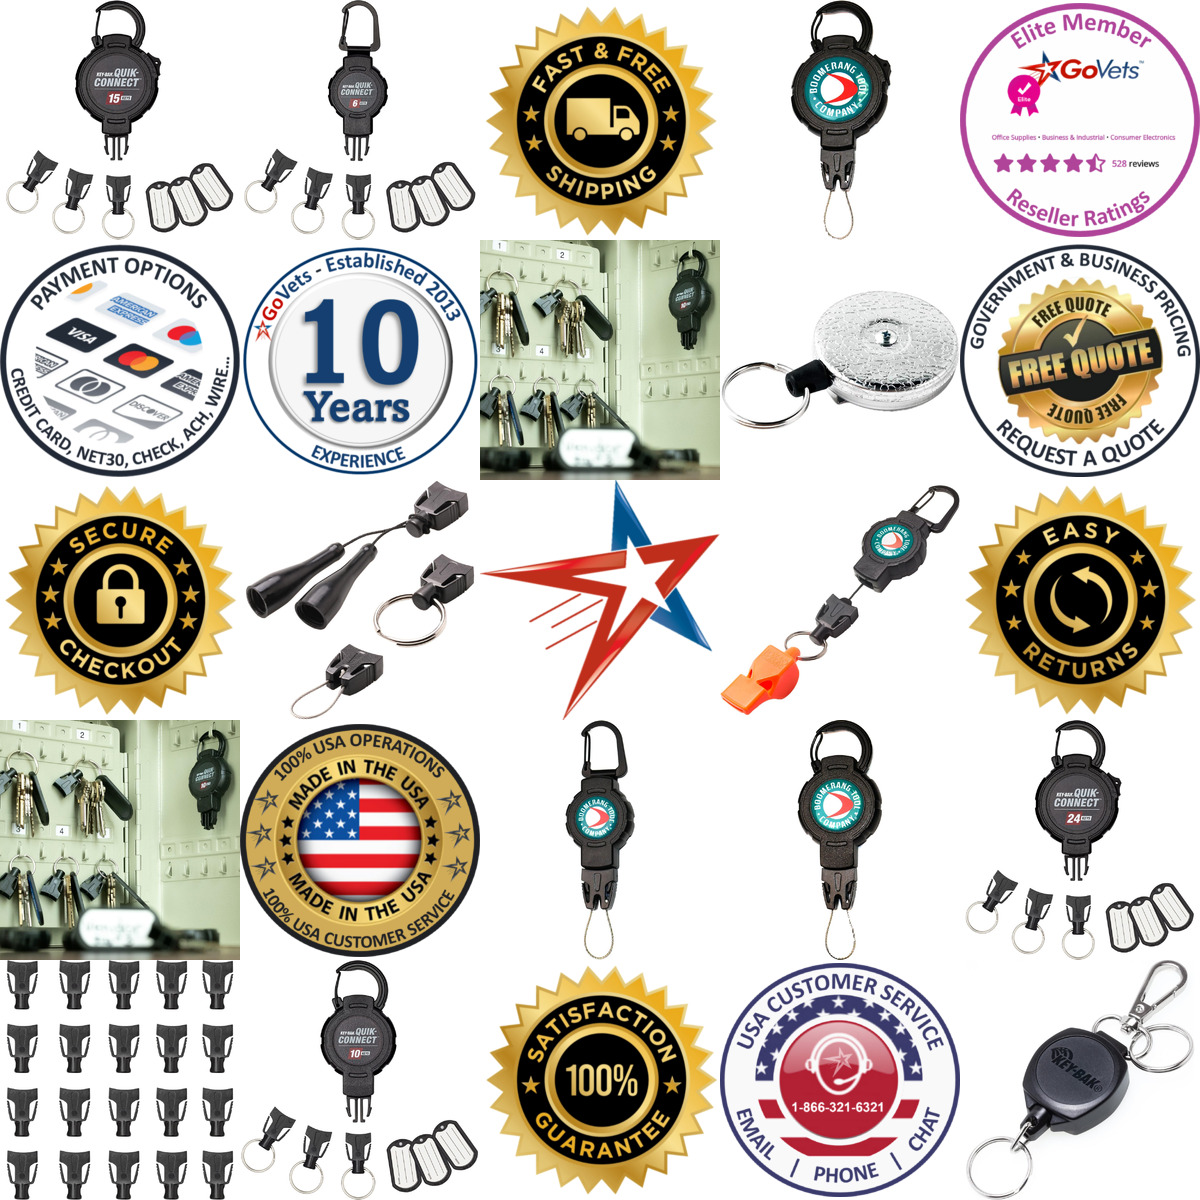 A selection of Key Rings Gear Tethers and Accessories products on GoVets